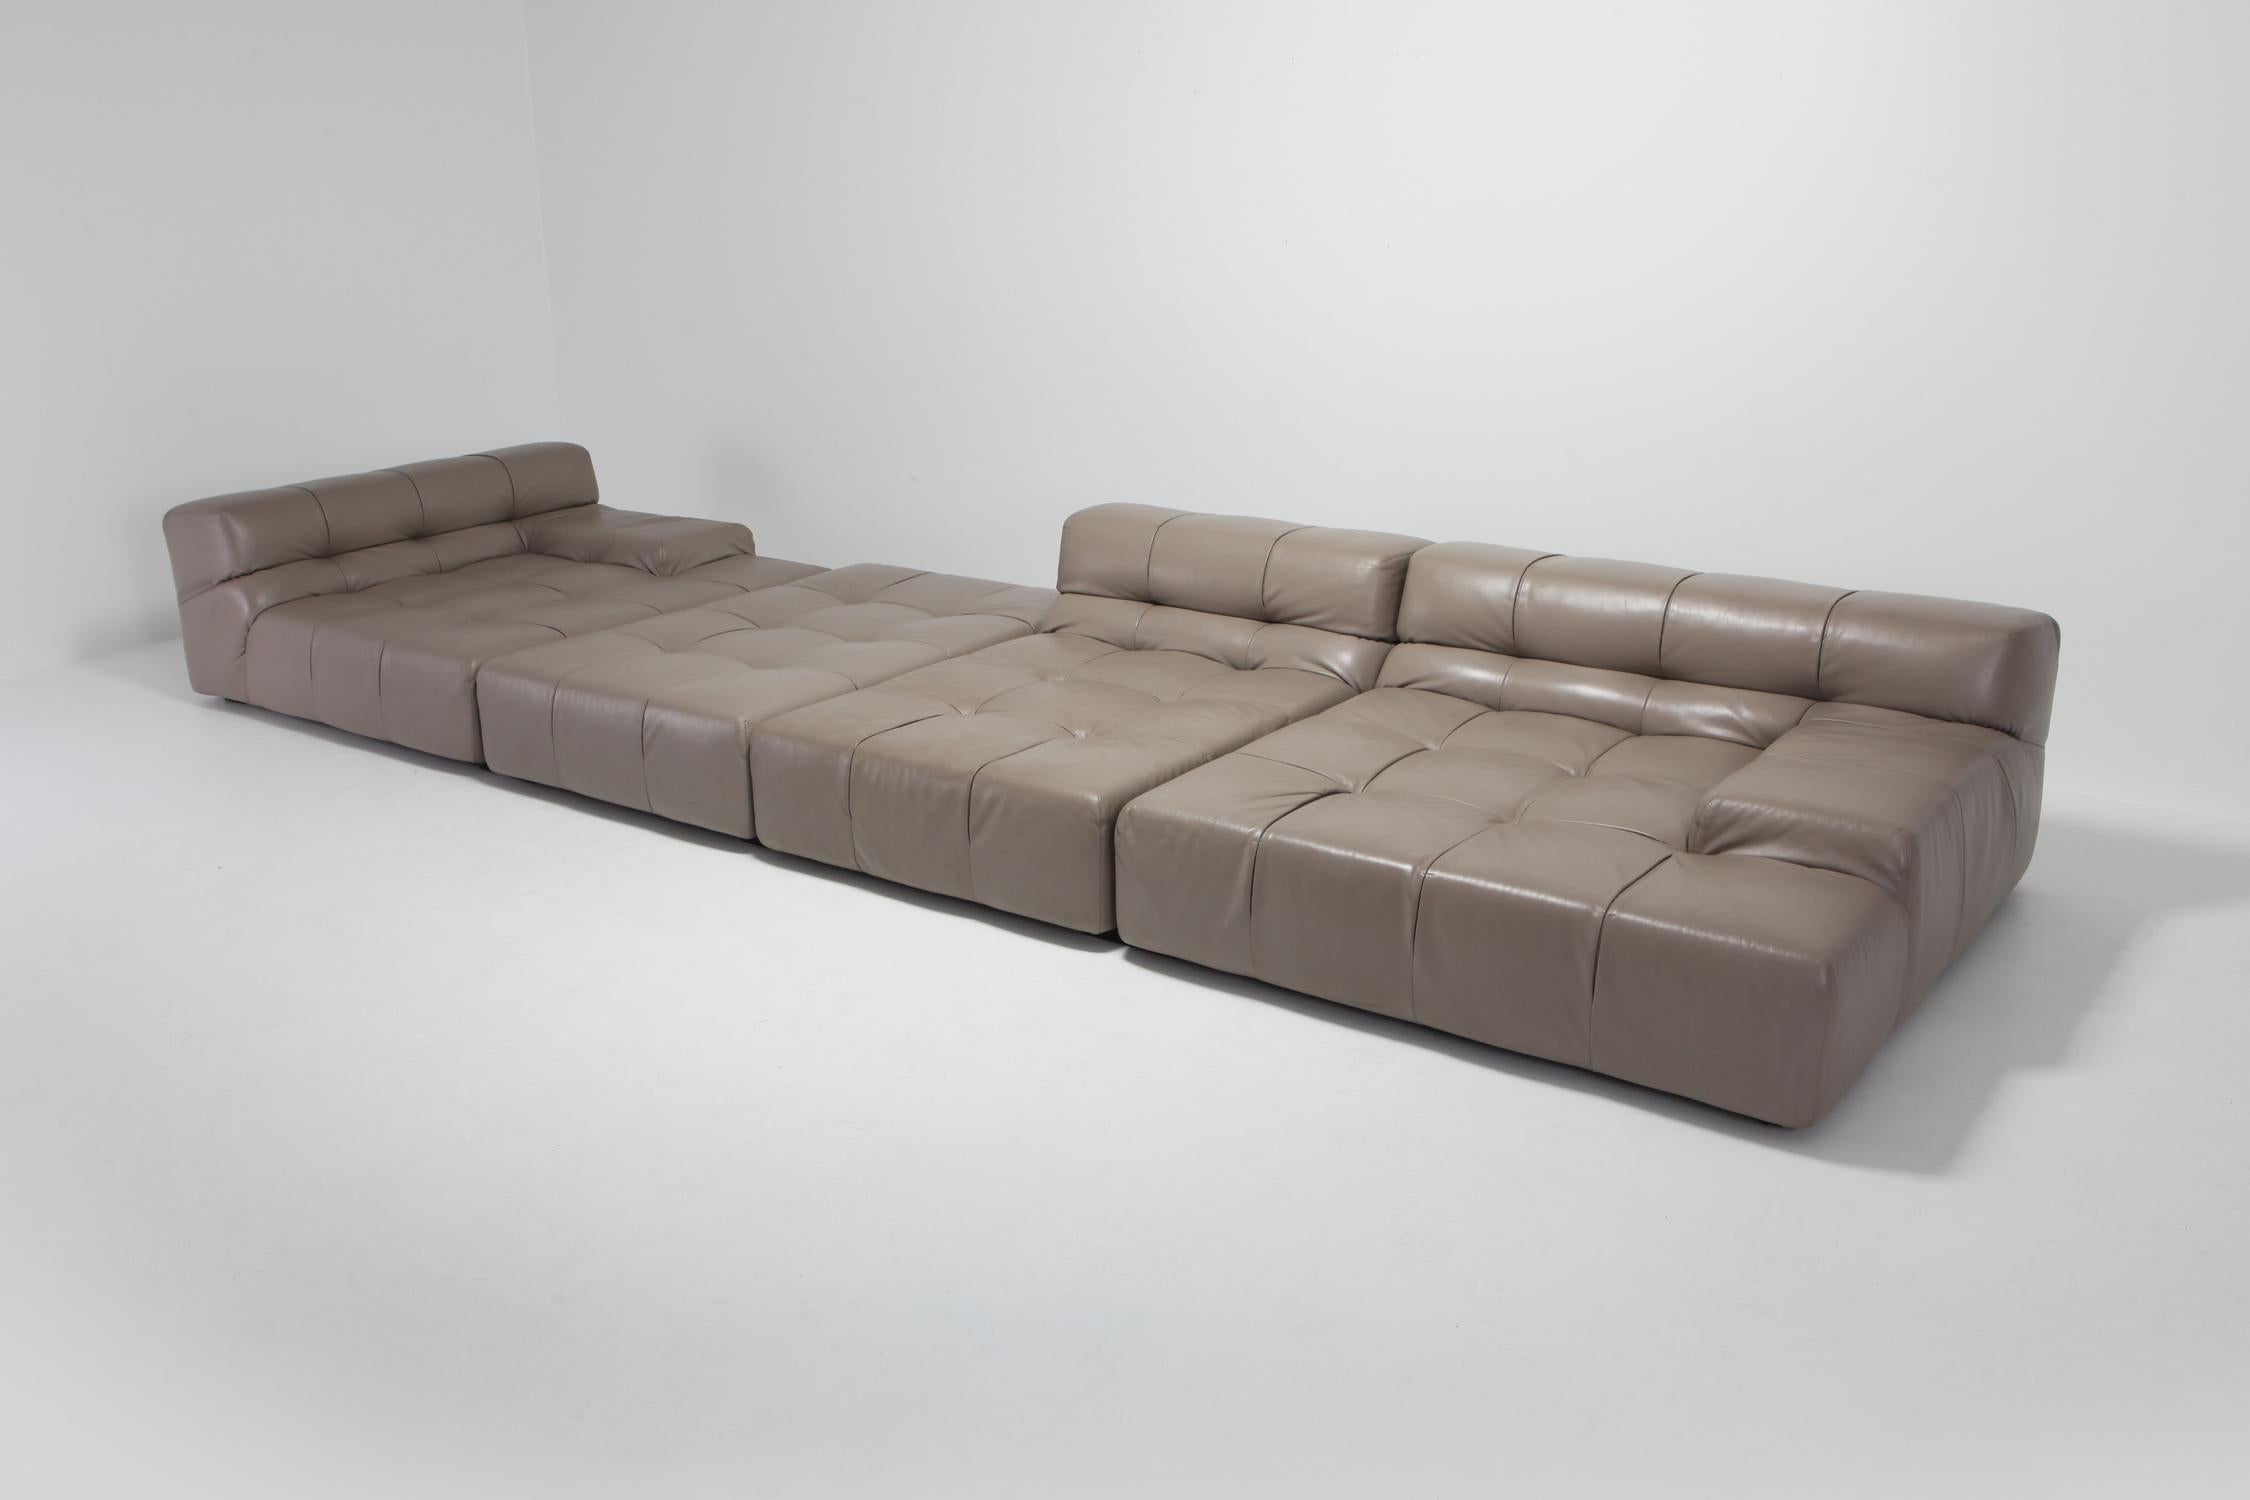 Other Tufty Time B&B Italia Taupe Leather Sectional Sofa by Patricia Urquiola